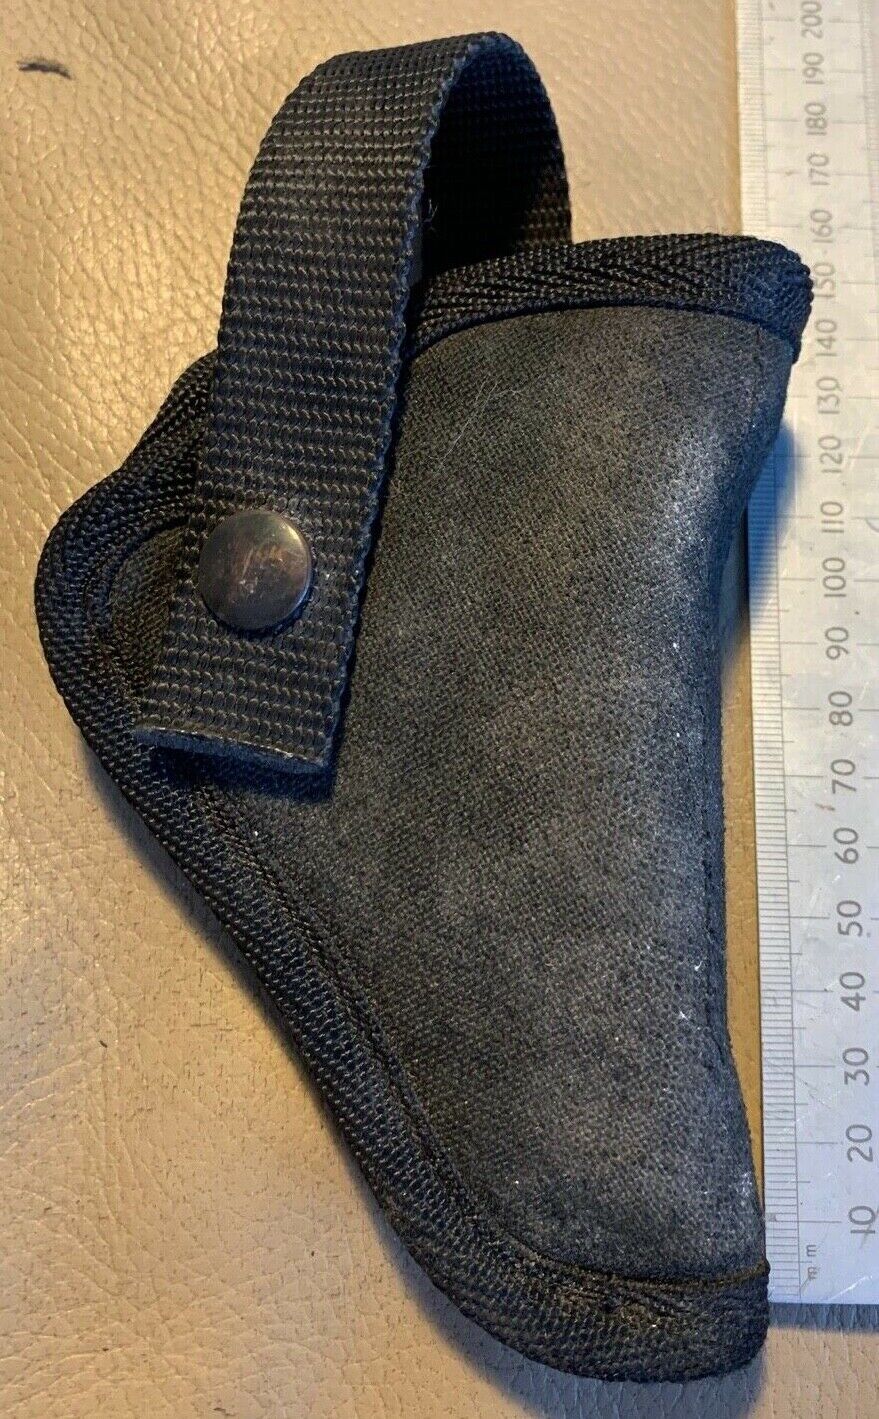 A Black Fabric Pistol Holster - Smith & Wesson - Size 32/62 - B38